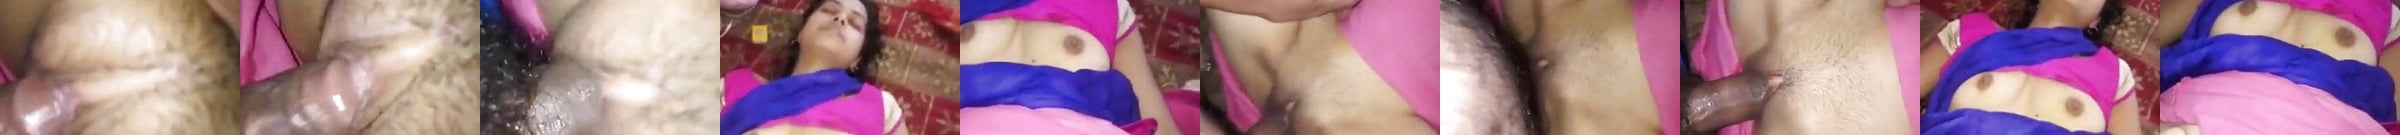 Featured Indian Lactating Aunty Porn Videos 2 Xhamster